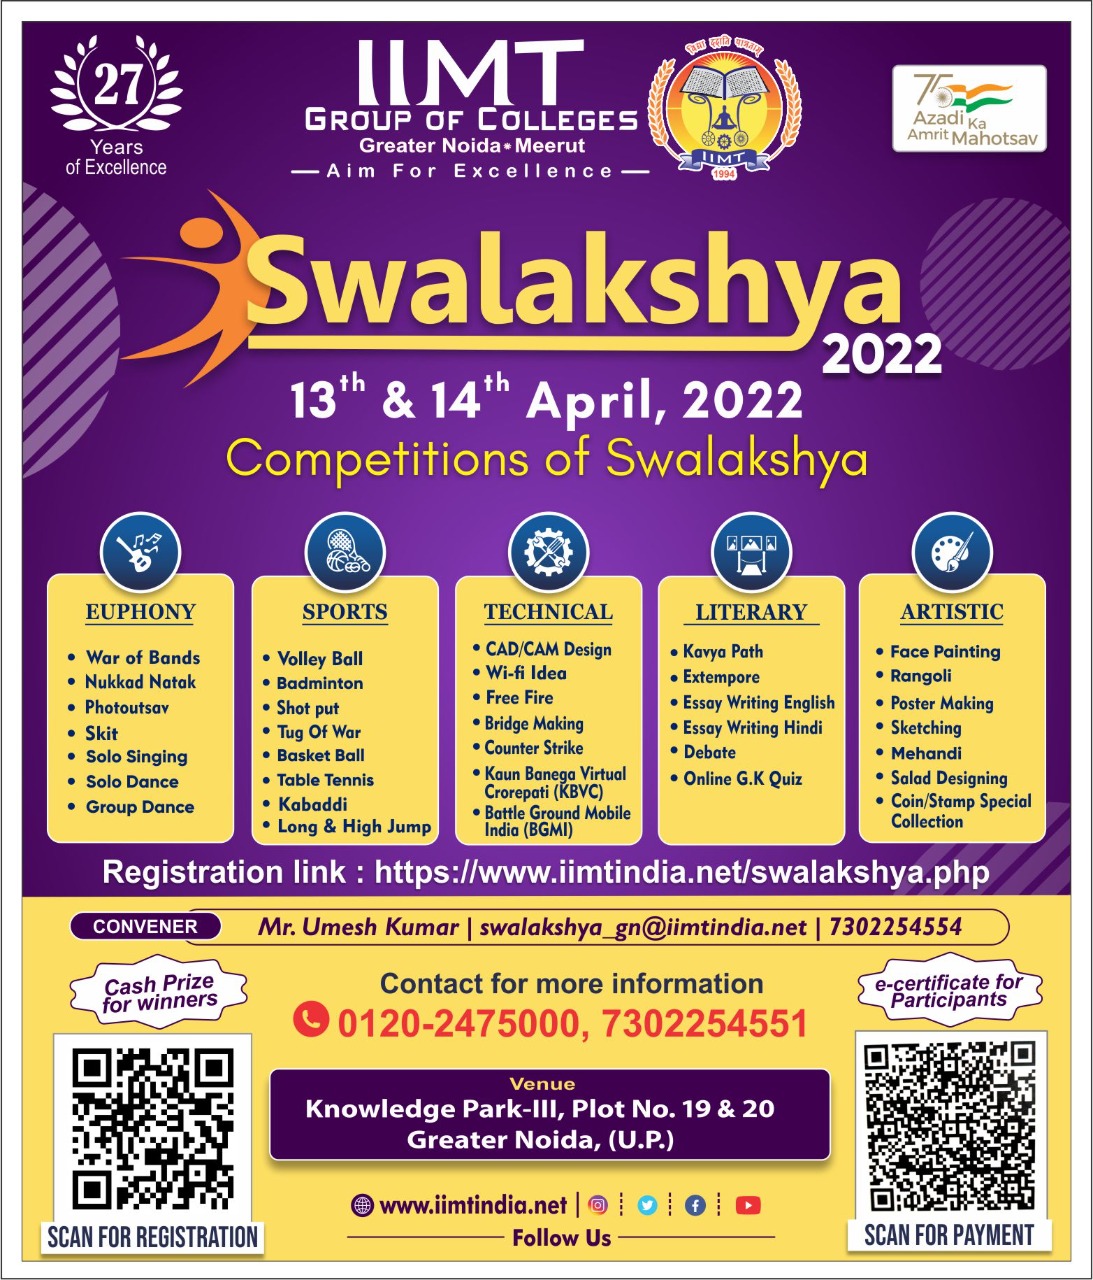 Swalakshya 2022 - Annual fest of IIMT Group of Colleges